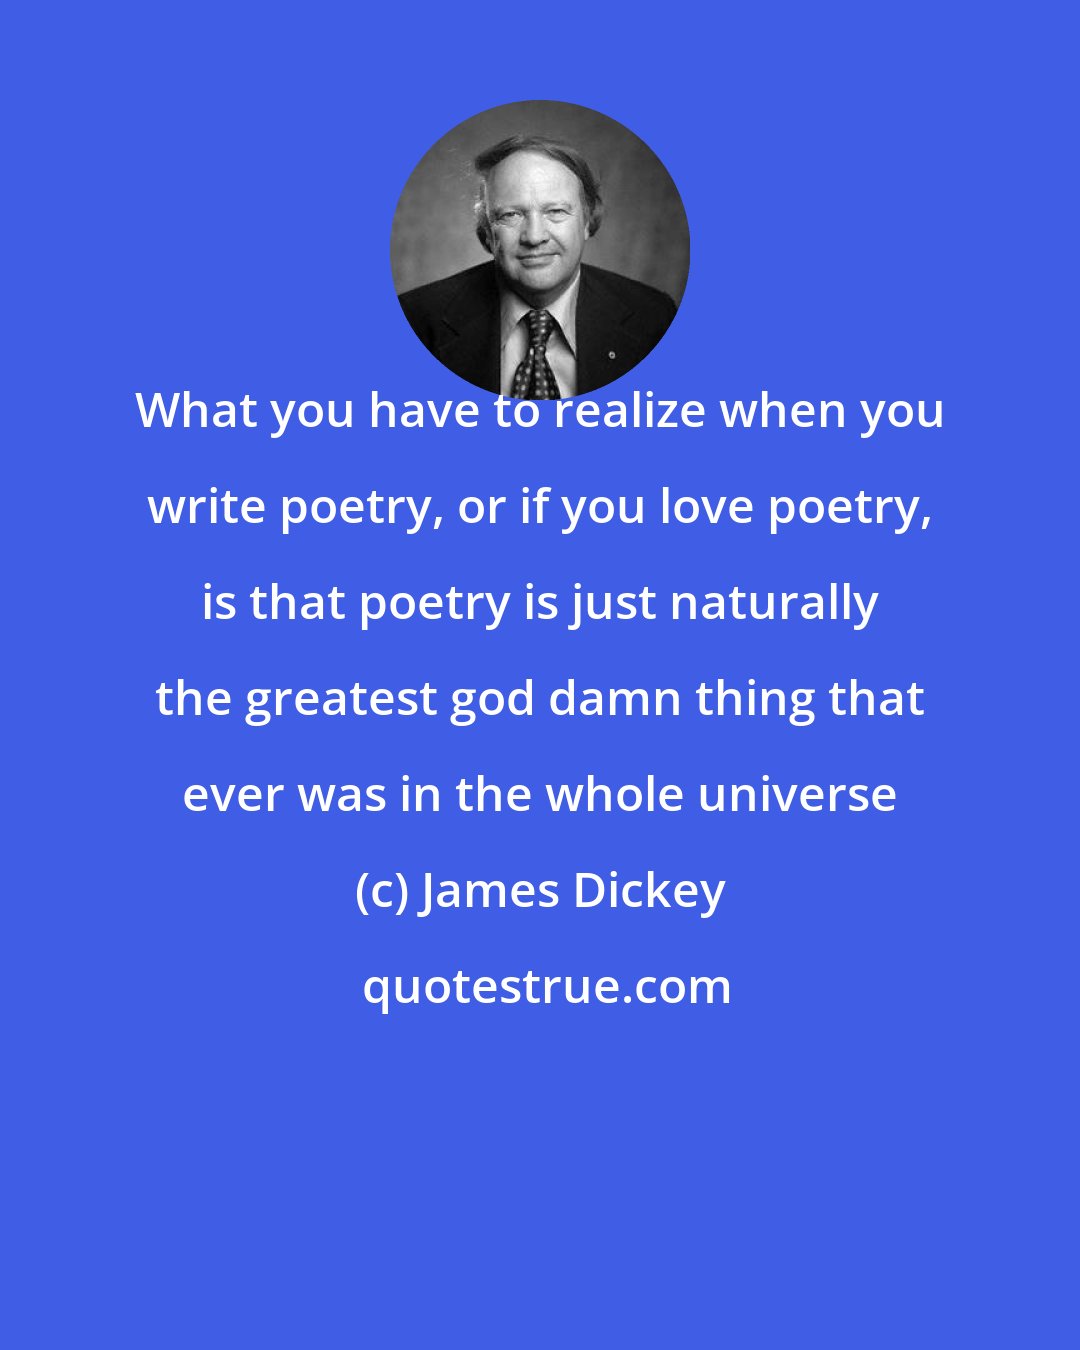 James Dickey: What you have to realize when you write poetry, or if you love poetry, is that poetry is just naturally the greatest god damn thing that ever was in the whole universe